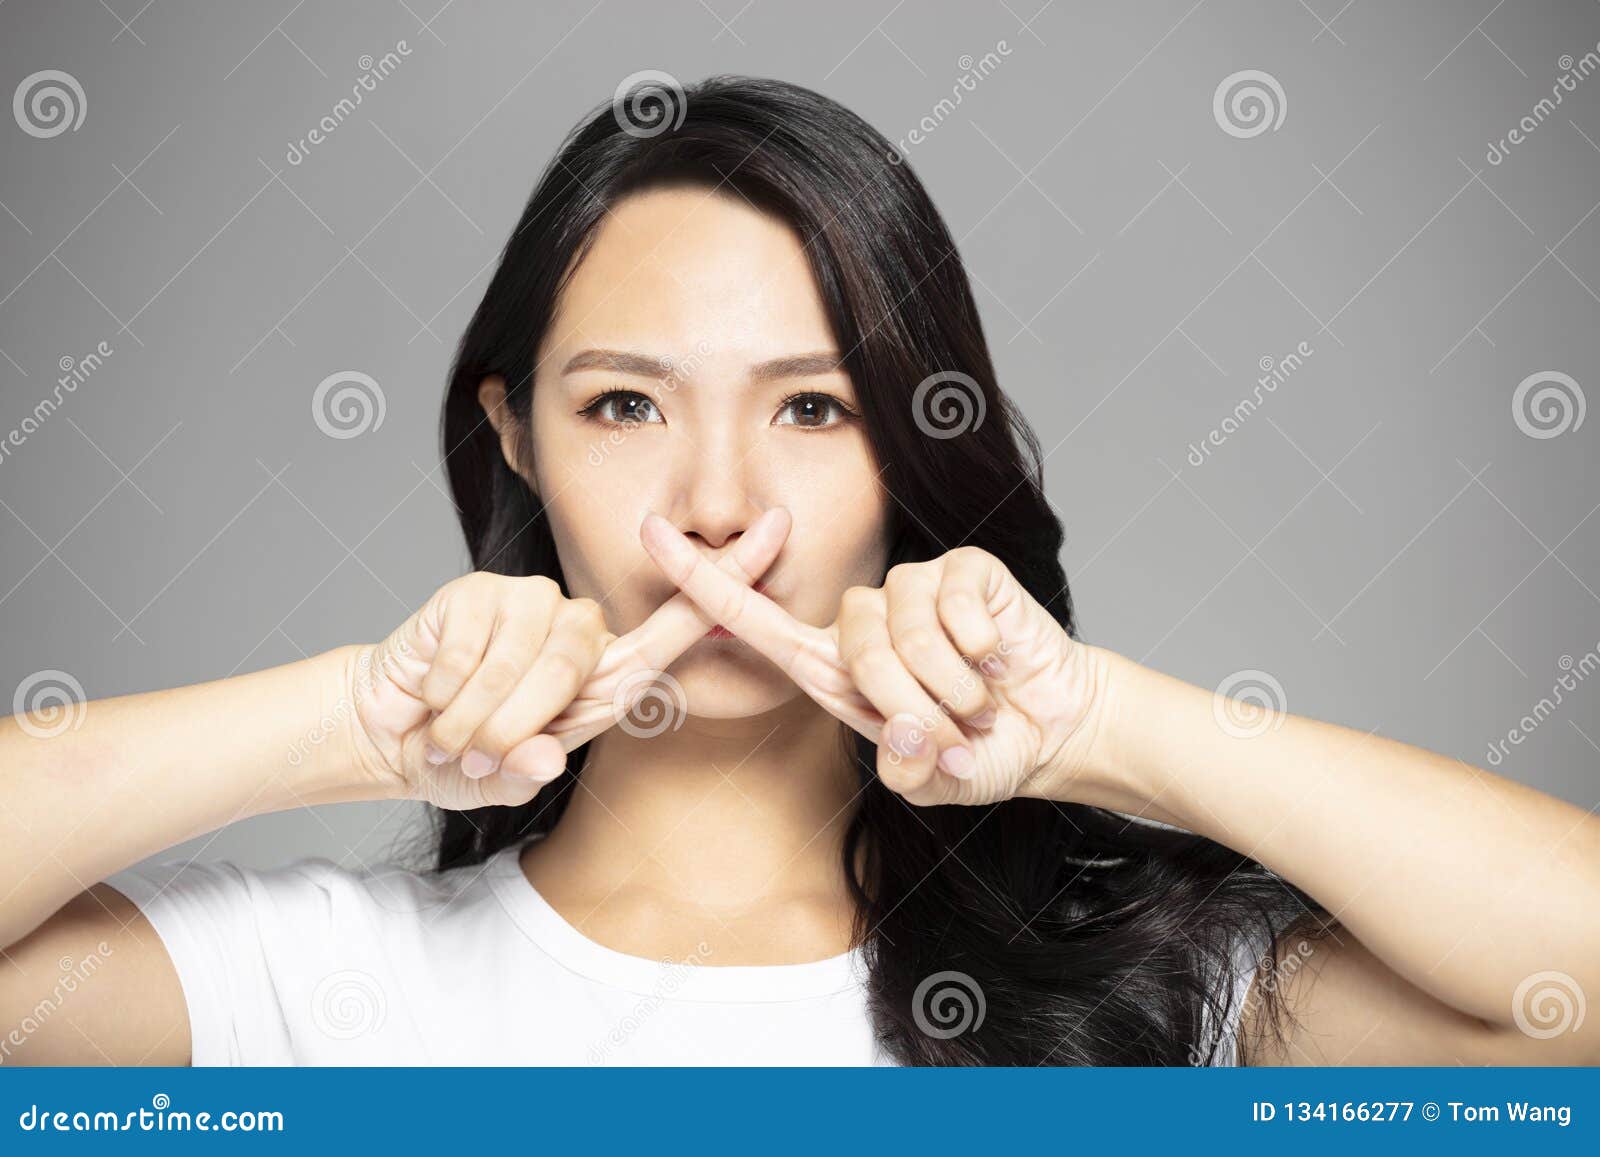 young asian woman with prohibit gesture